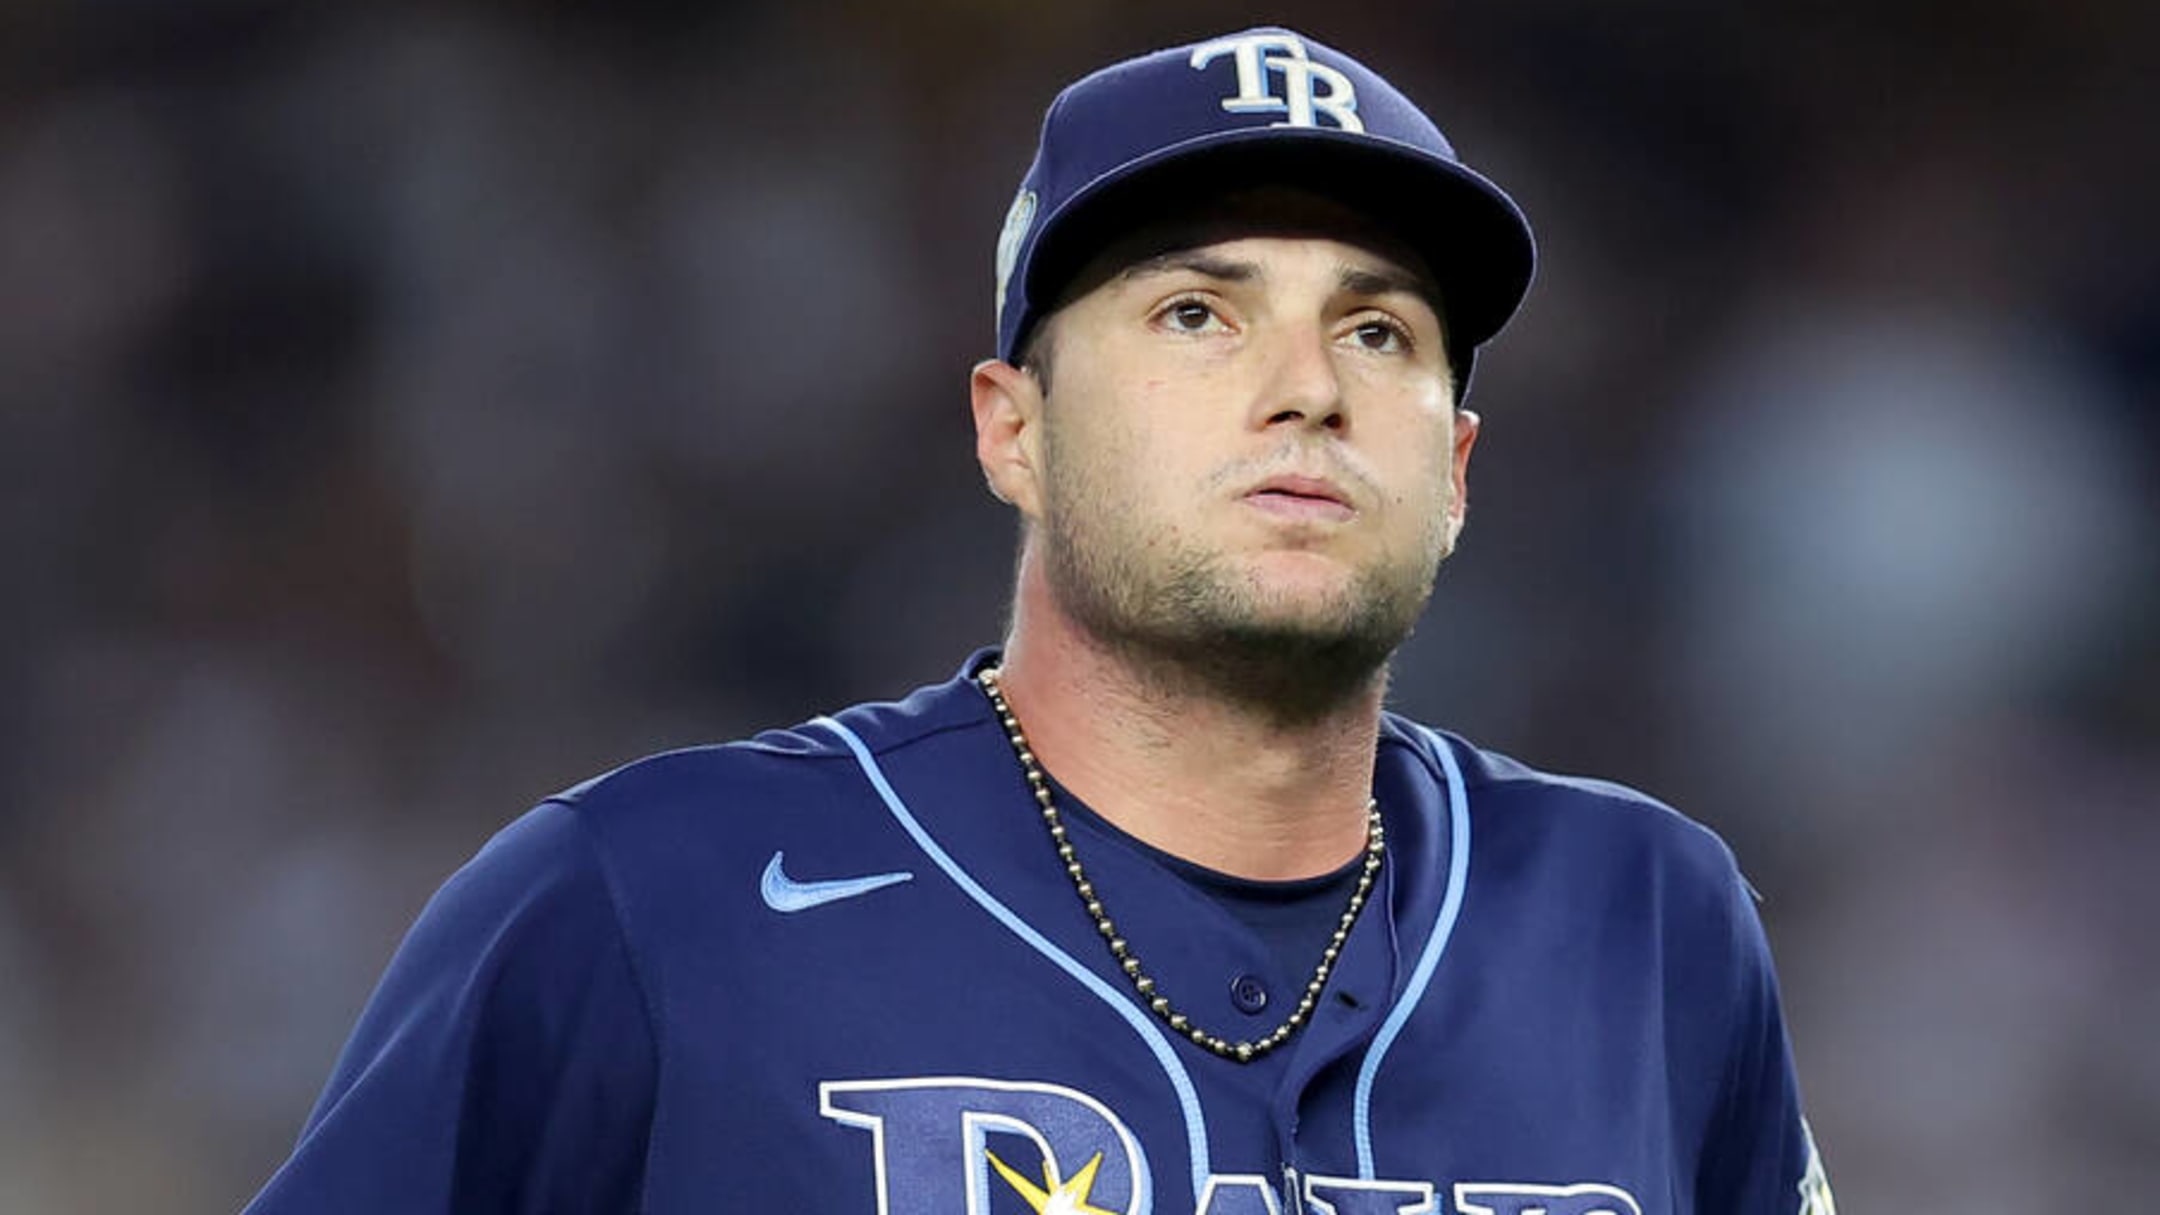 Rays' McClanahan to undergo 2nd Tommy John surgery